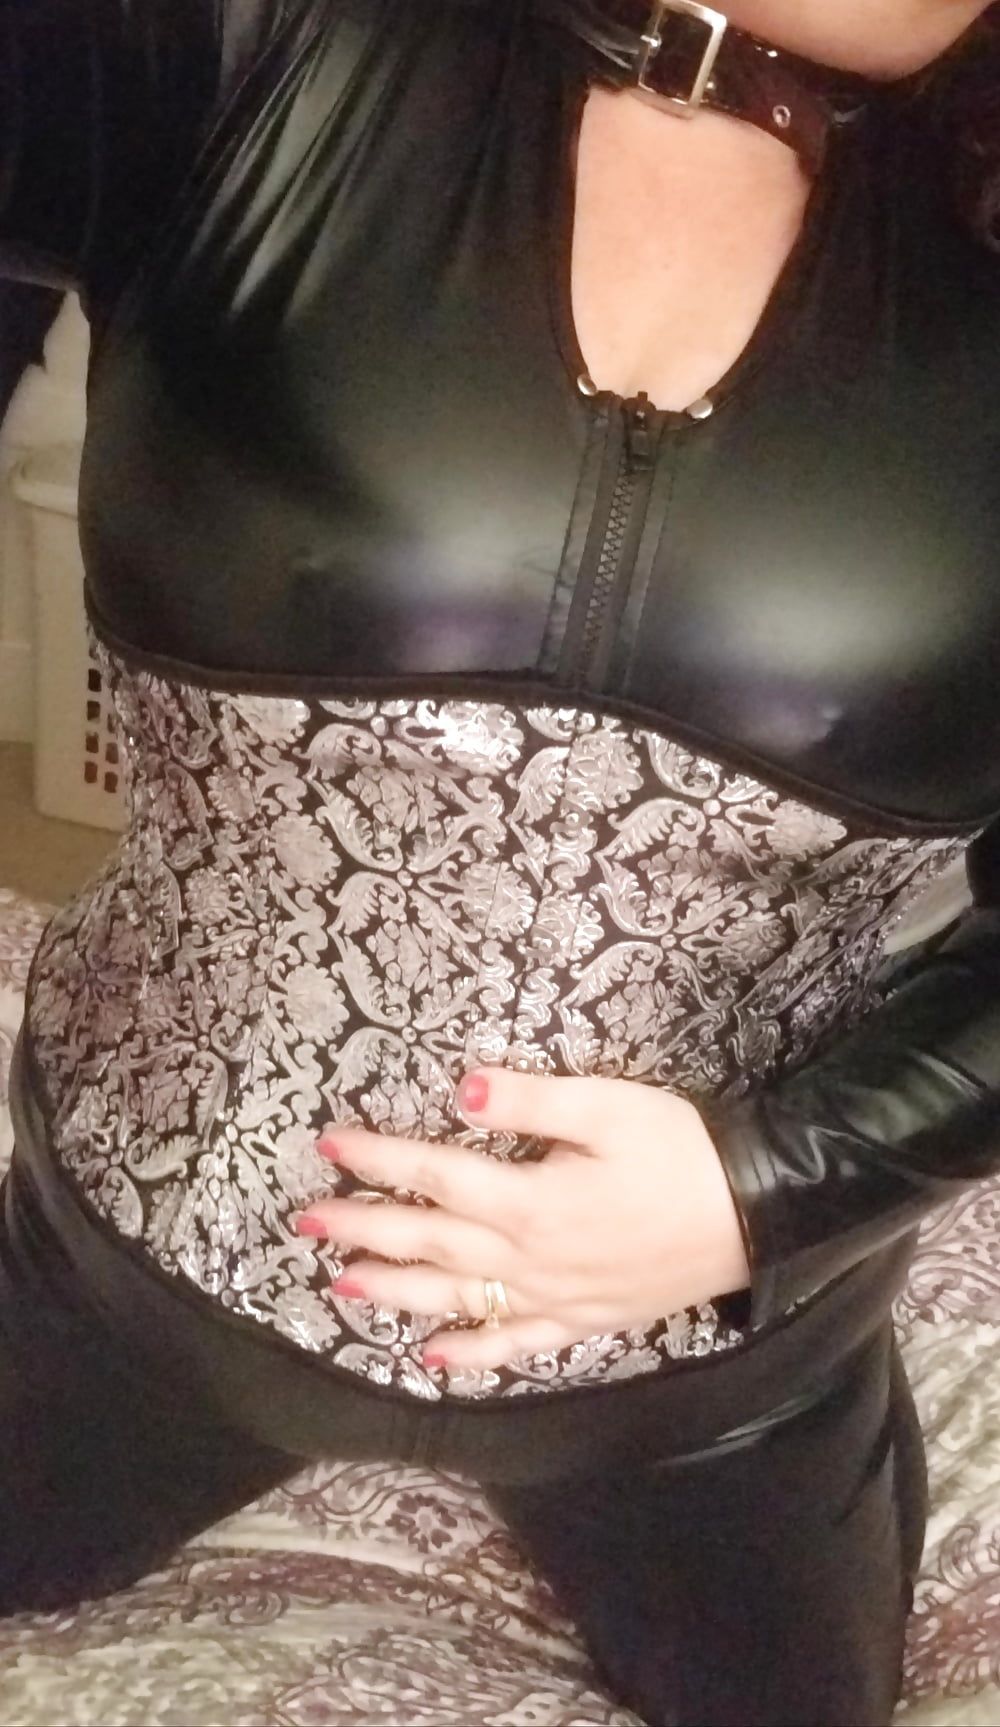 New cat suit birthday surprise for hubby - milf housewife  #30